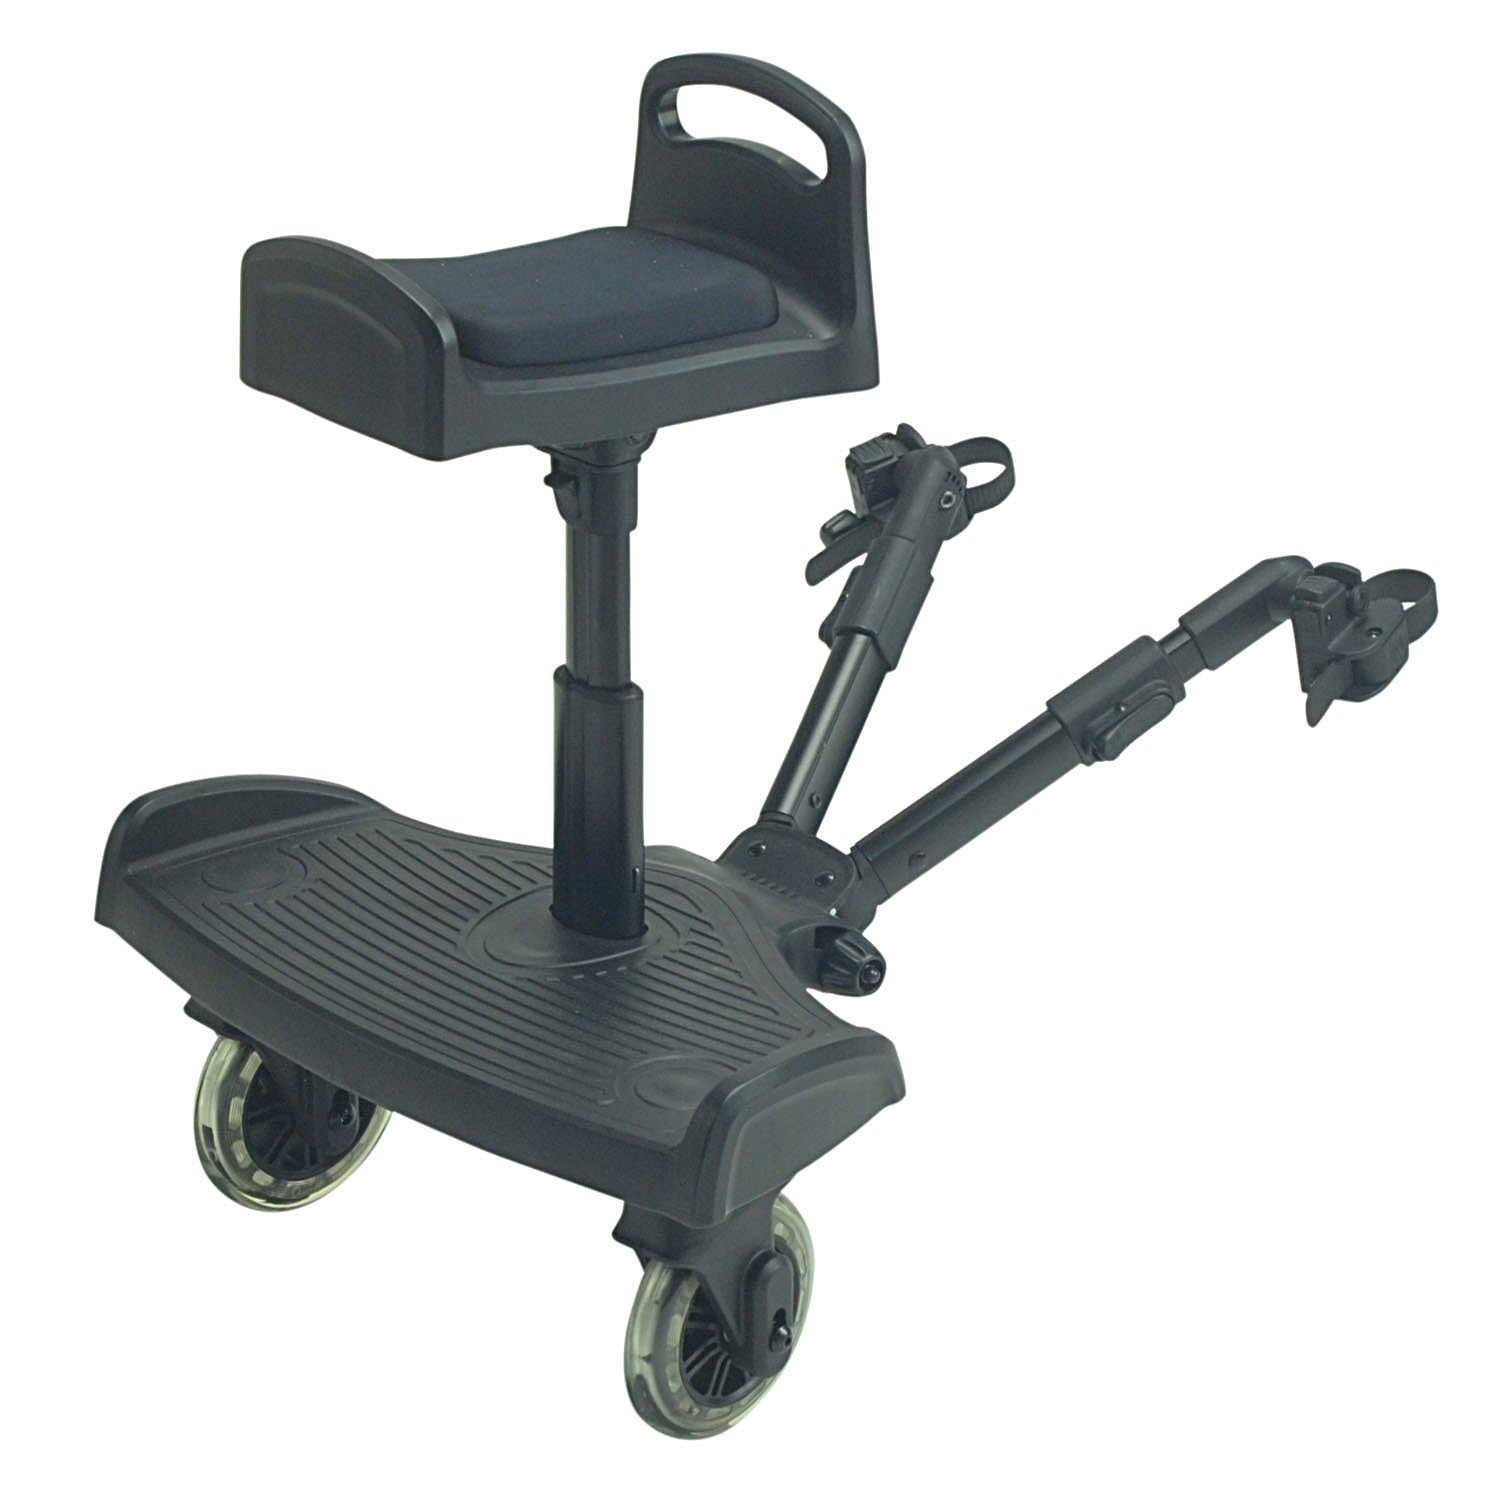 For-Your-Little-Ride On Board Compatible Travel Systems, Teutonia Spirit S3